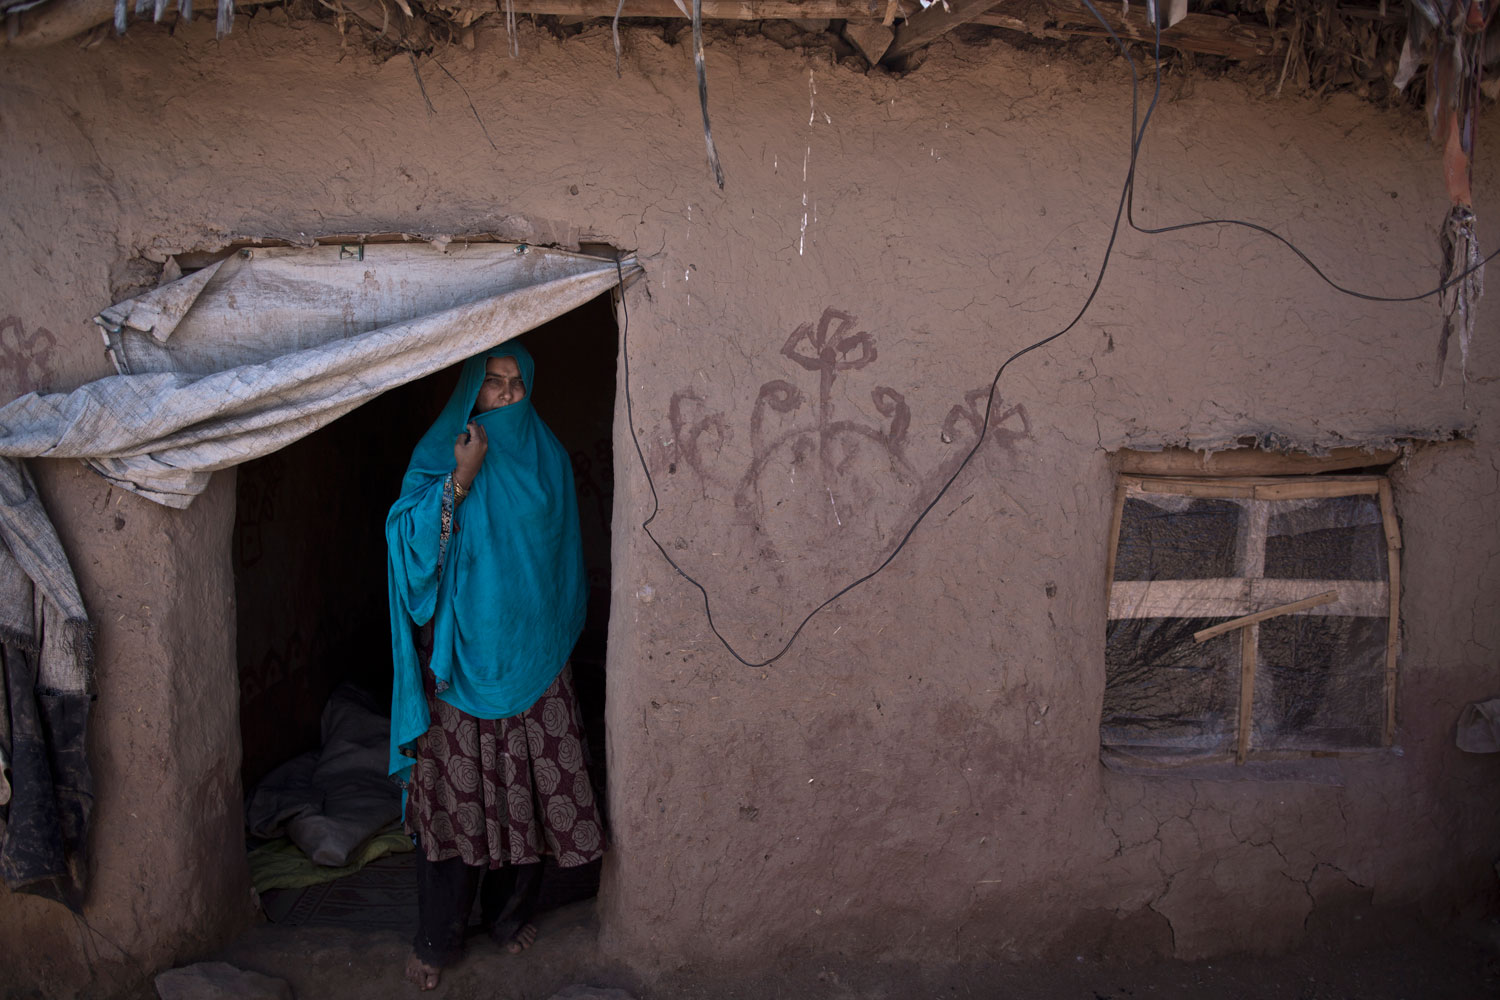 Afghan refugee Belquis Elias, 42, a mother of 4 now adult children, at the doorway of her mud house on the outskirts of Islamabad on March 30, 2014. Elias and her husband fled their hometown of Khairabad 19 years ago and took refuge in Pakistan.